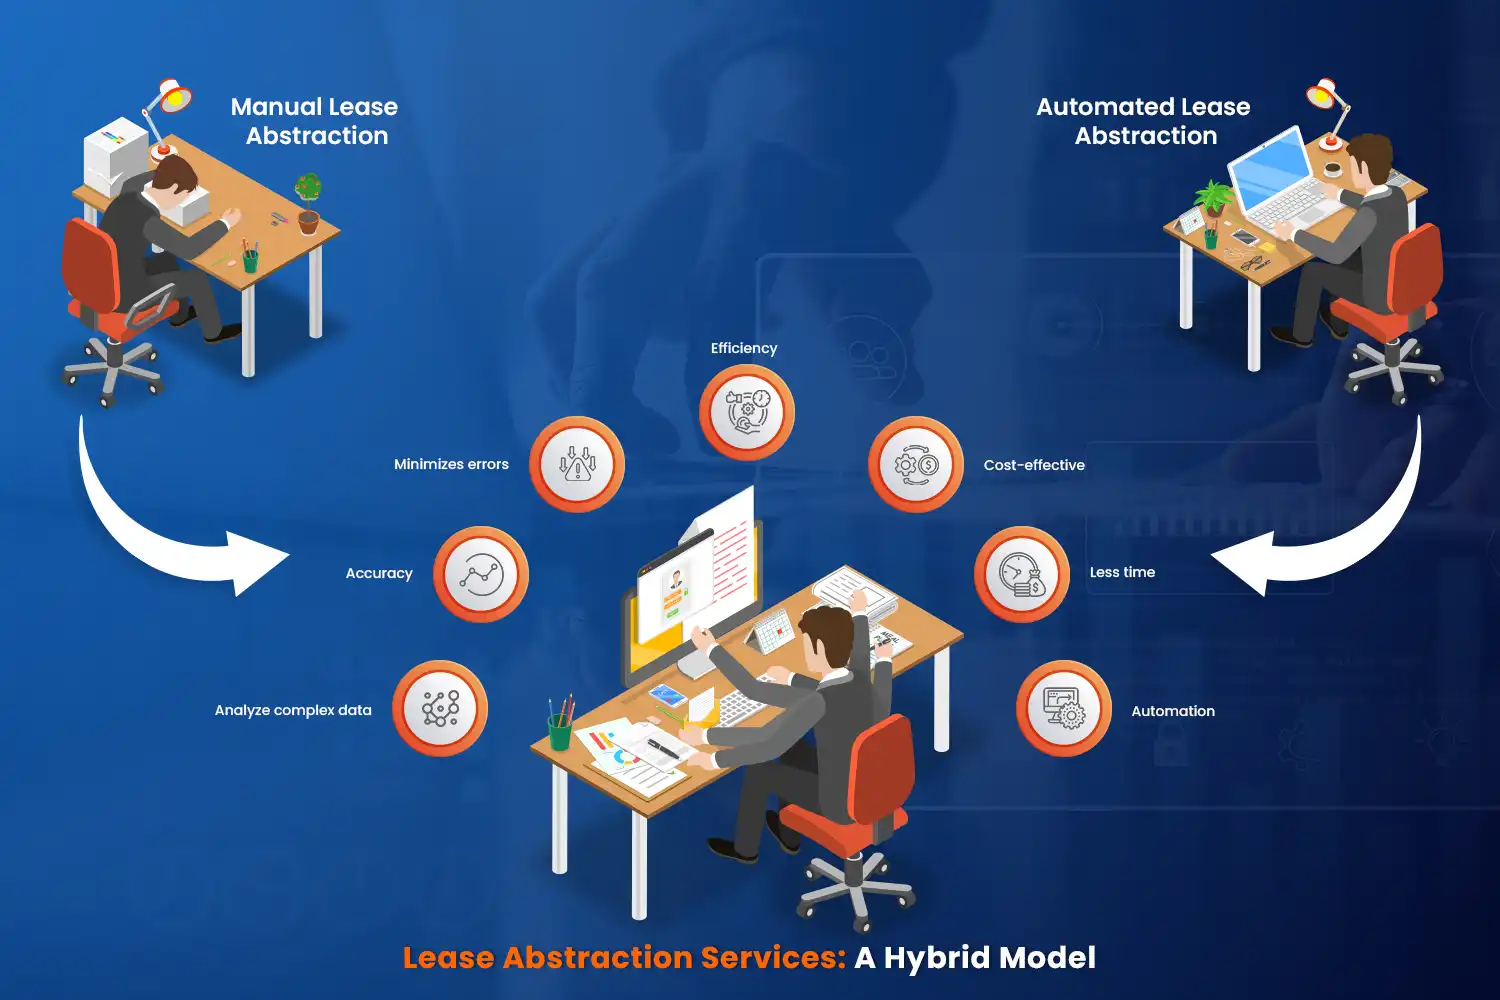 Lease Abstraction Services - A Hybrid Model